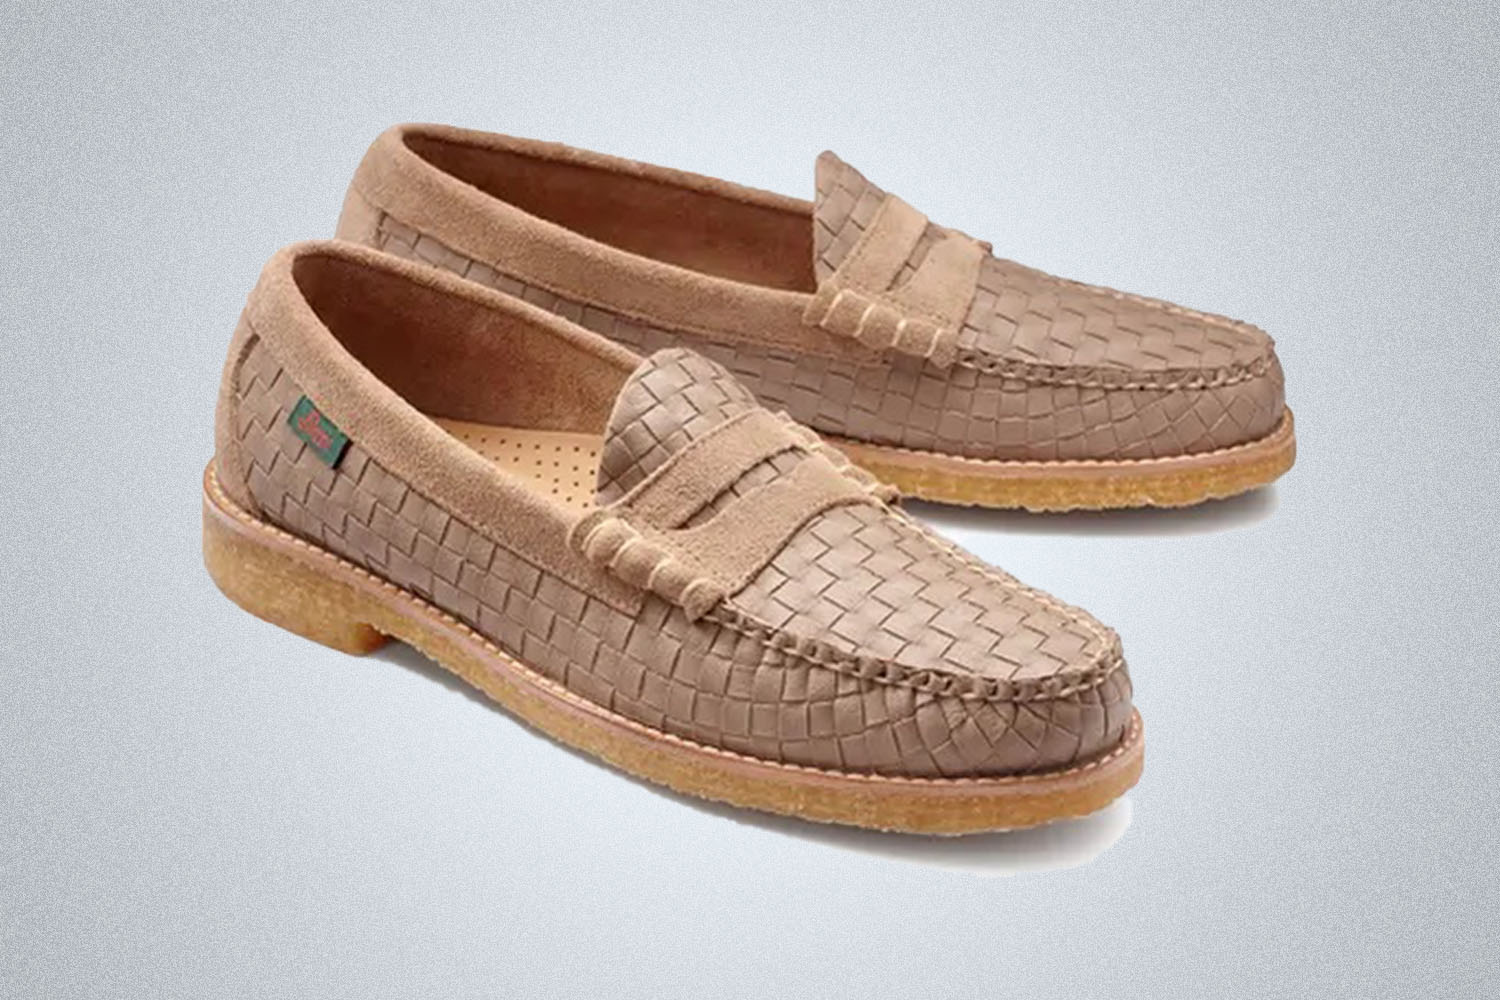 a pair of woven tan loafers from G.H. Bass on a grey background